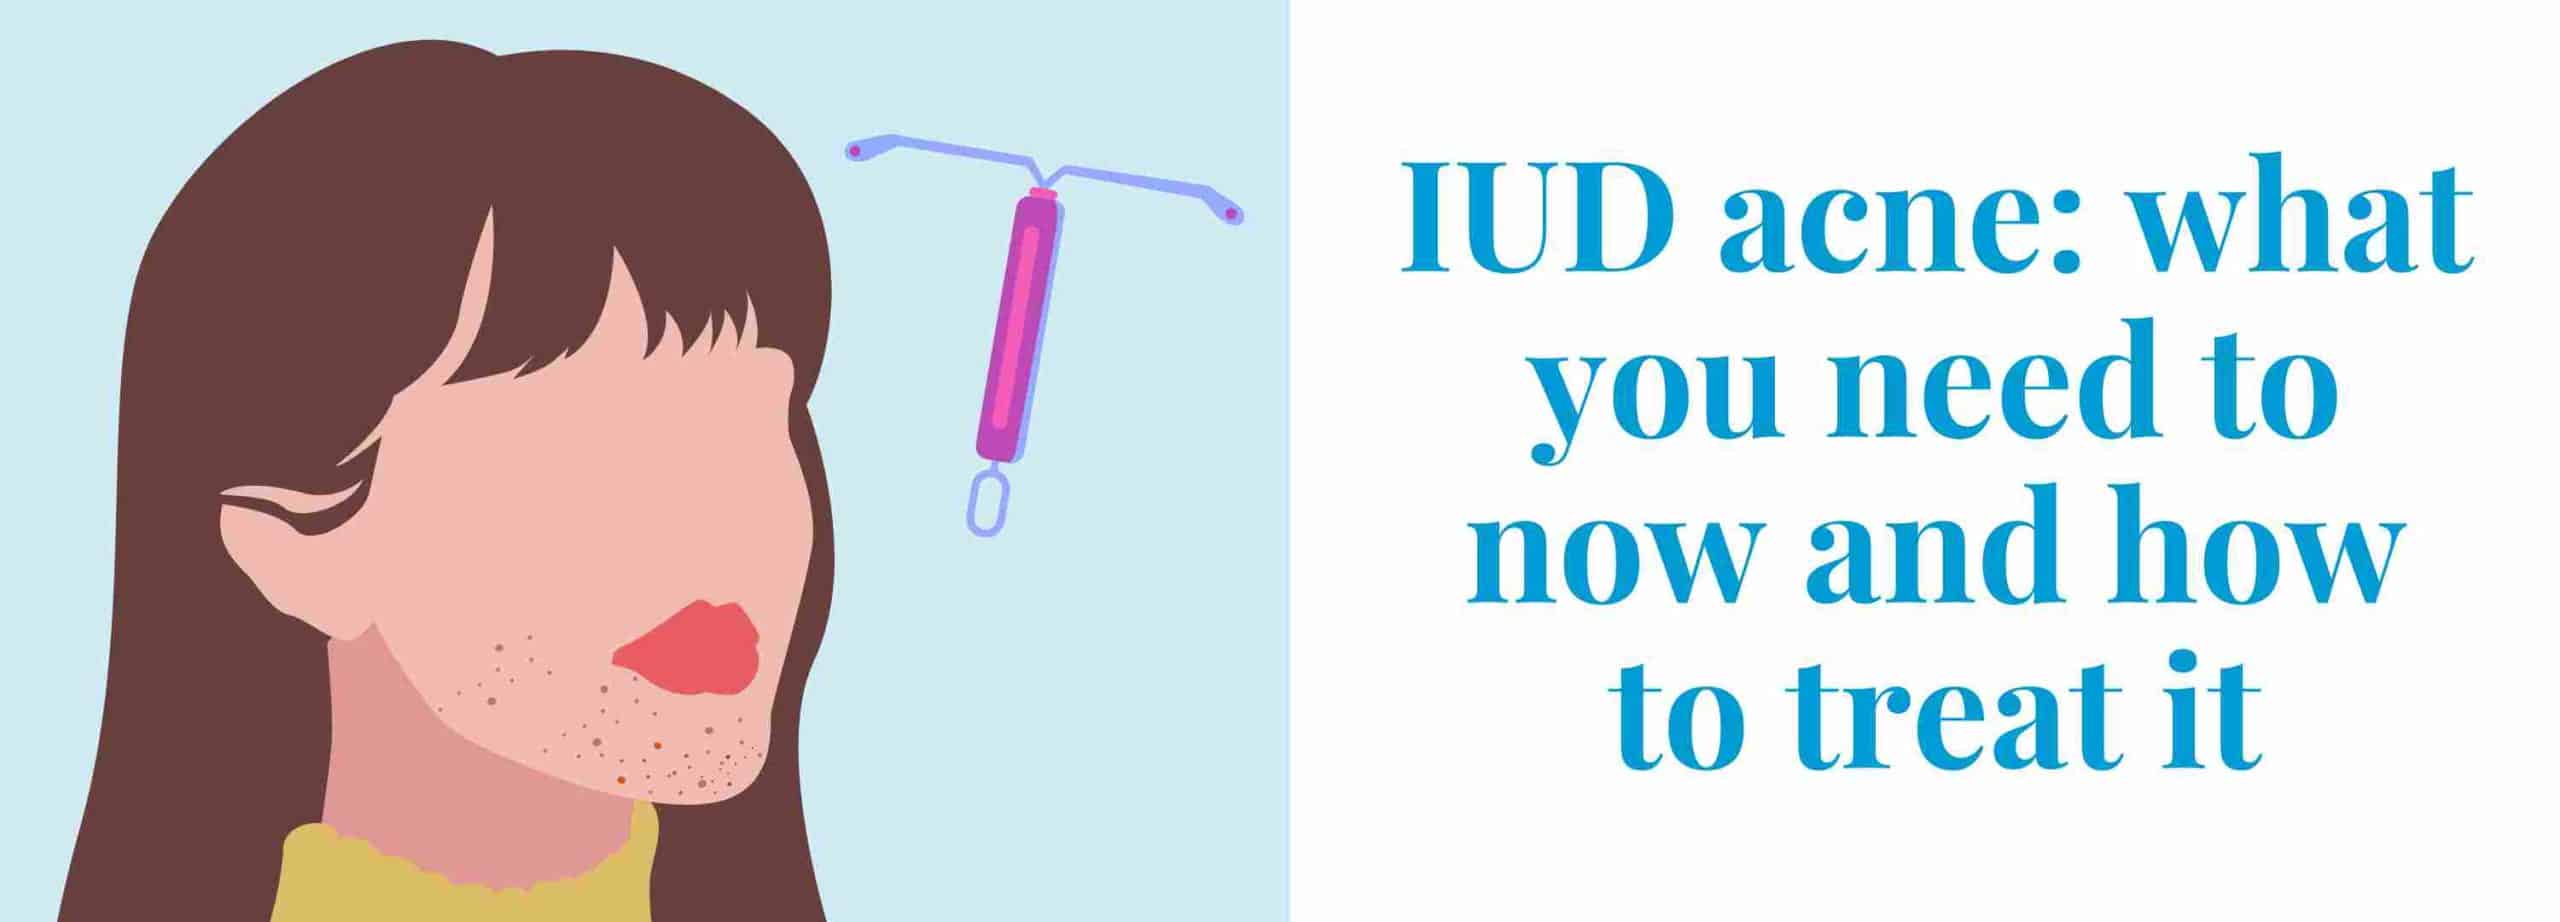 IUD Acne: How IUD's Can Cause Acne, And How To Treat It